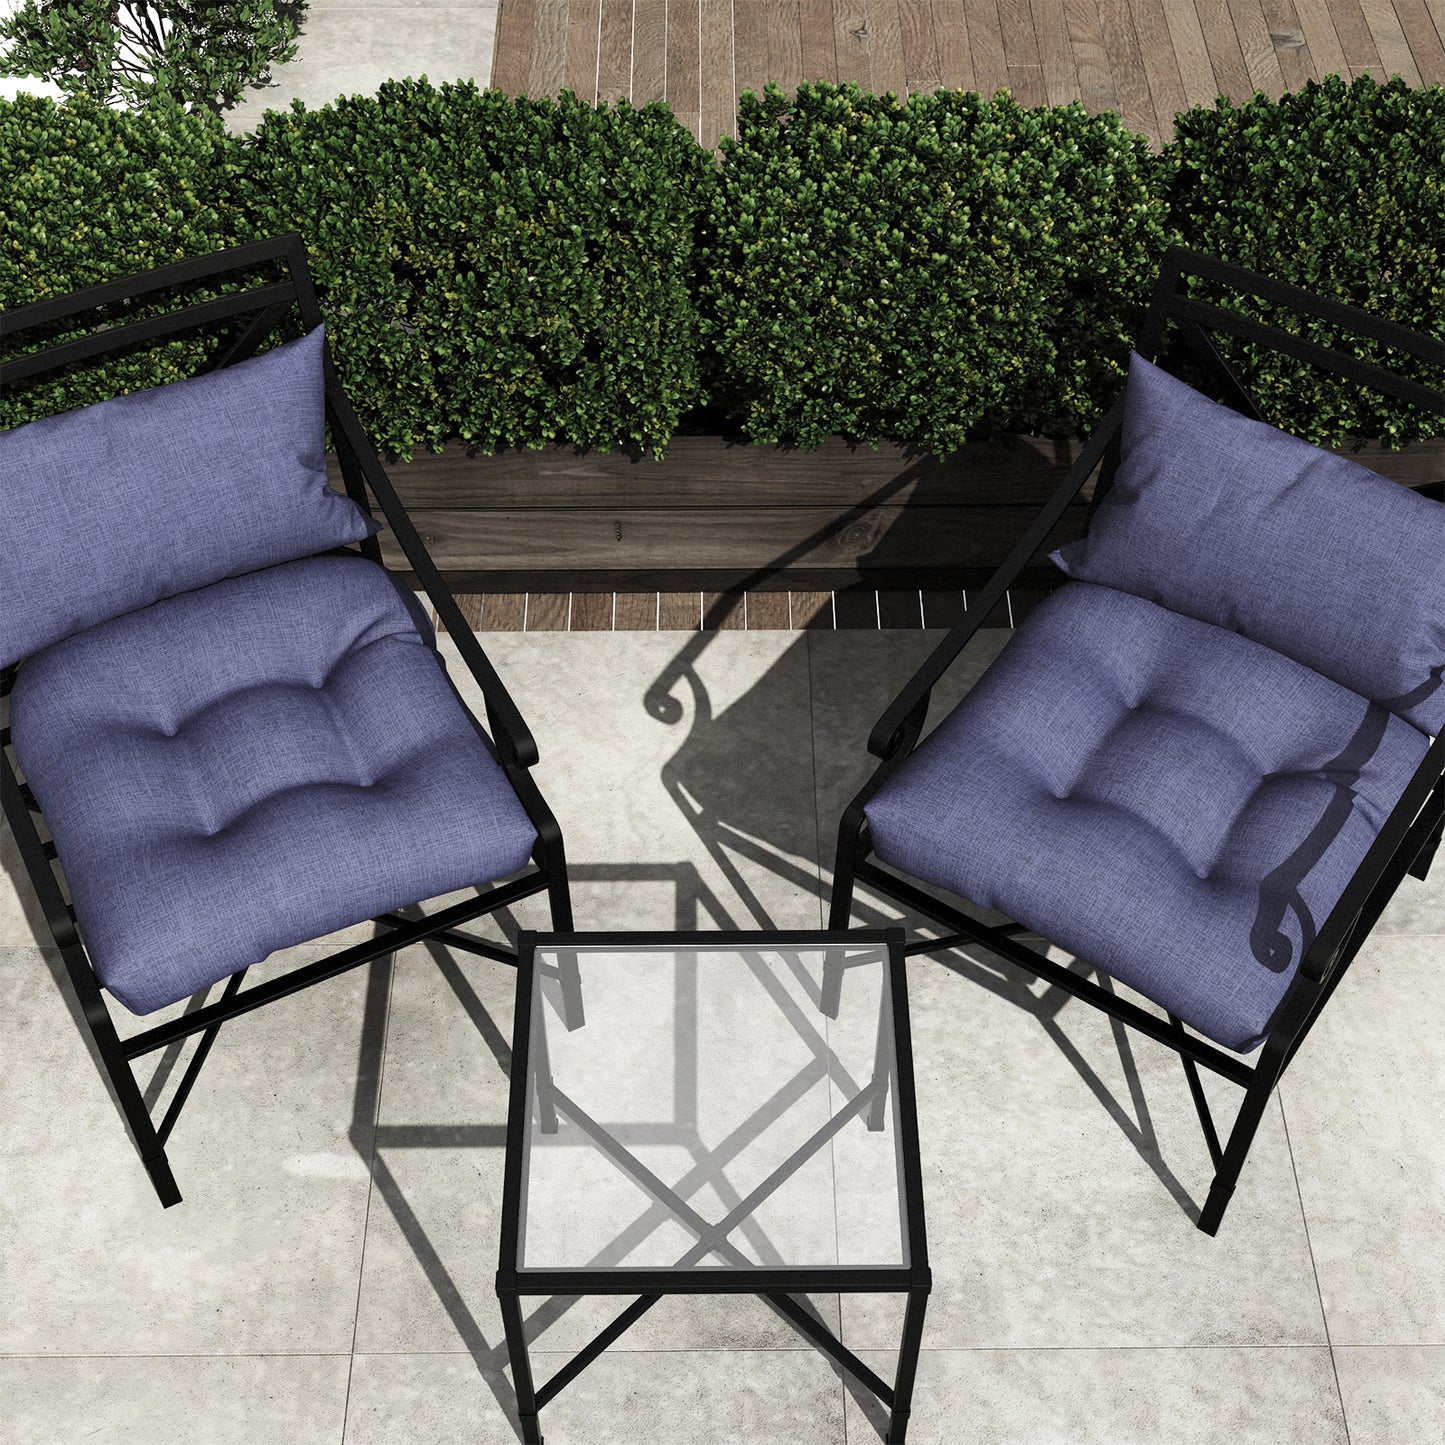 Melody Elephant Patio Wicker Chair Cushions, All Weather Outdoor Tufted Chair Pads Pack of 2, 19 x 19 x 5 Inch U-Shaped Seat Cushions of Garden Furniture Decoration, Textured Navy